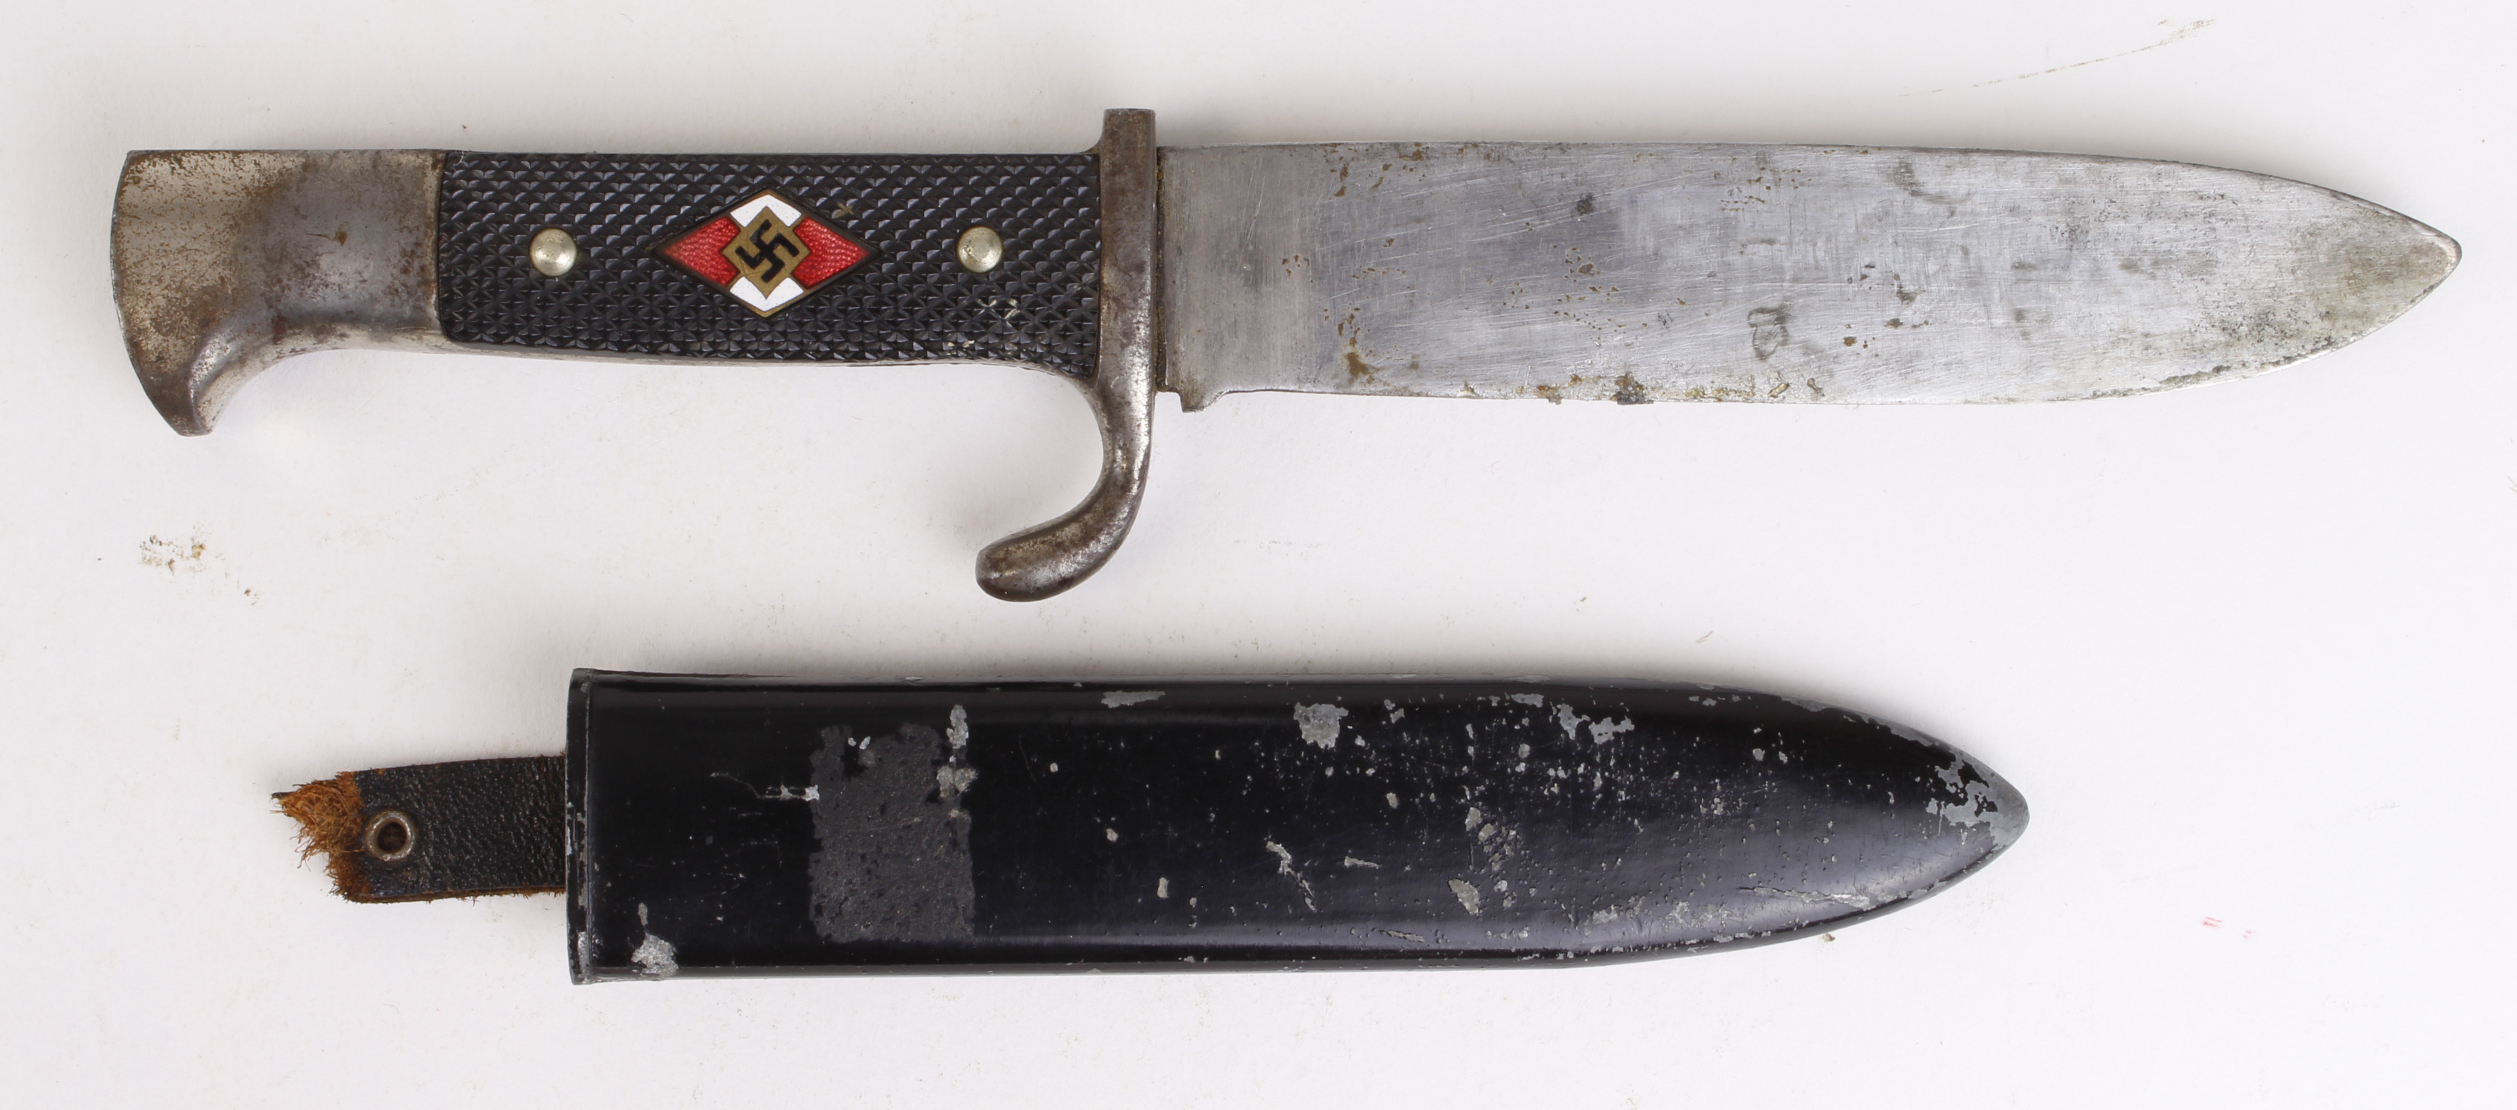 German Nazi Hitler Youth dagger with scabbard. Leather strap missing. Blade maker marked 'Puma